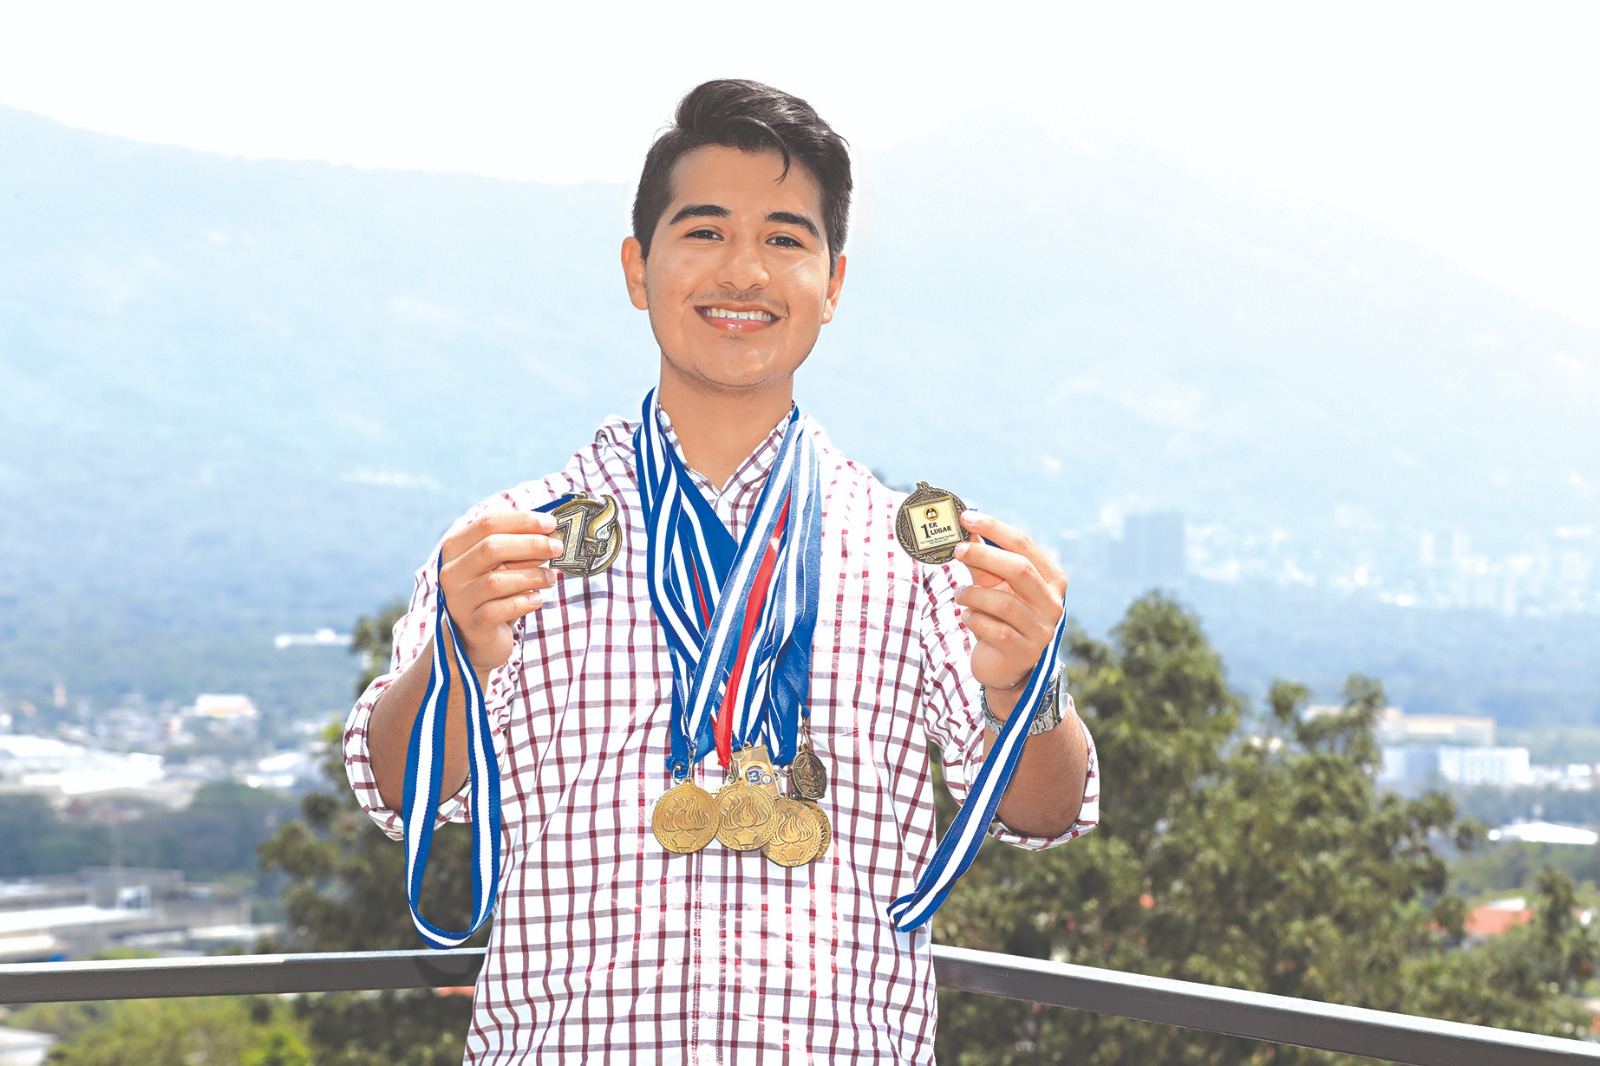 Young person will represent El Salvador at International Chemistry Olympiad in Switzerland